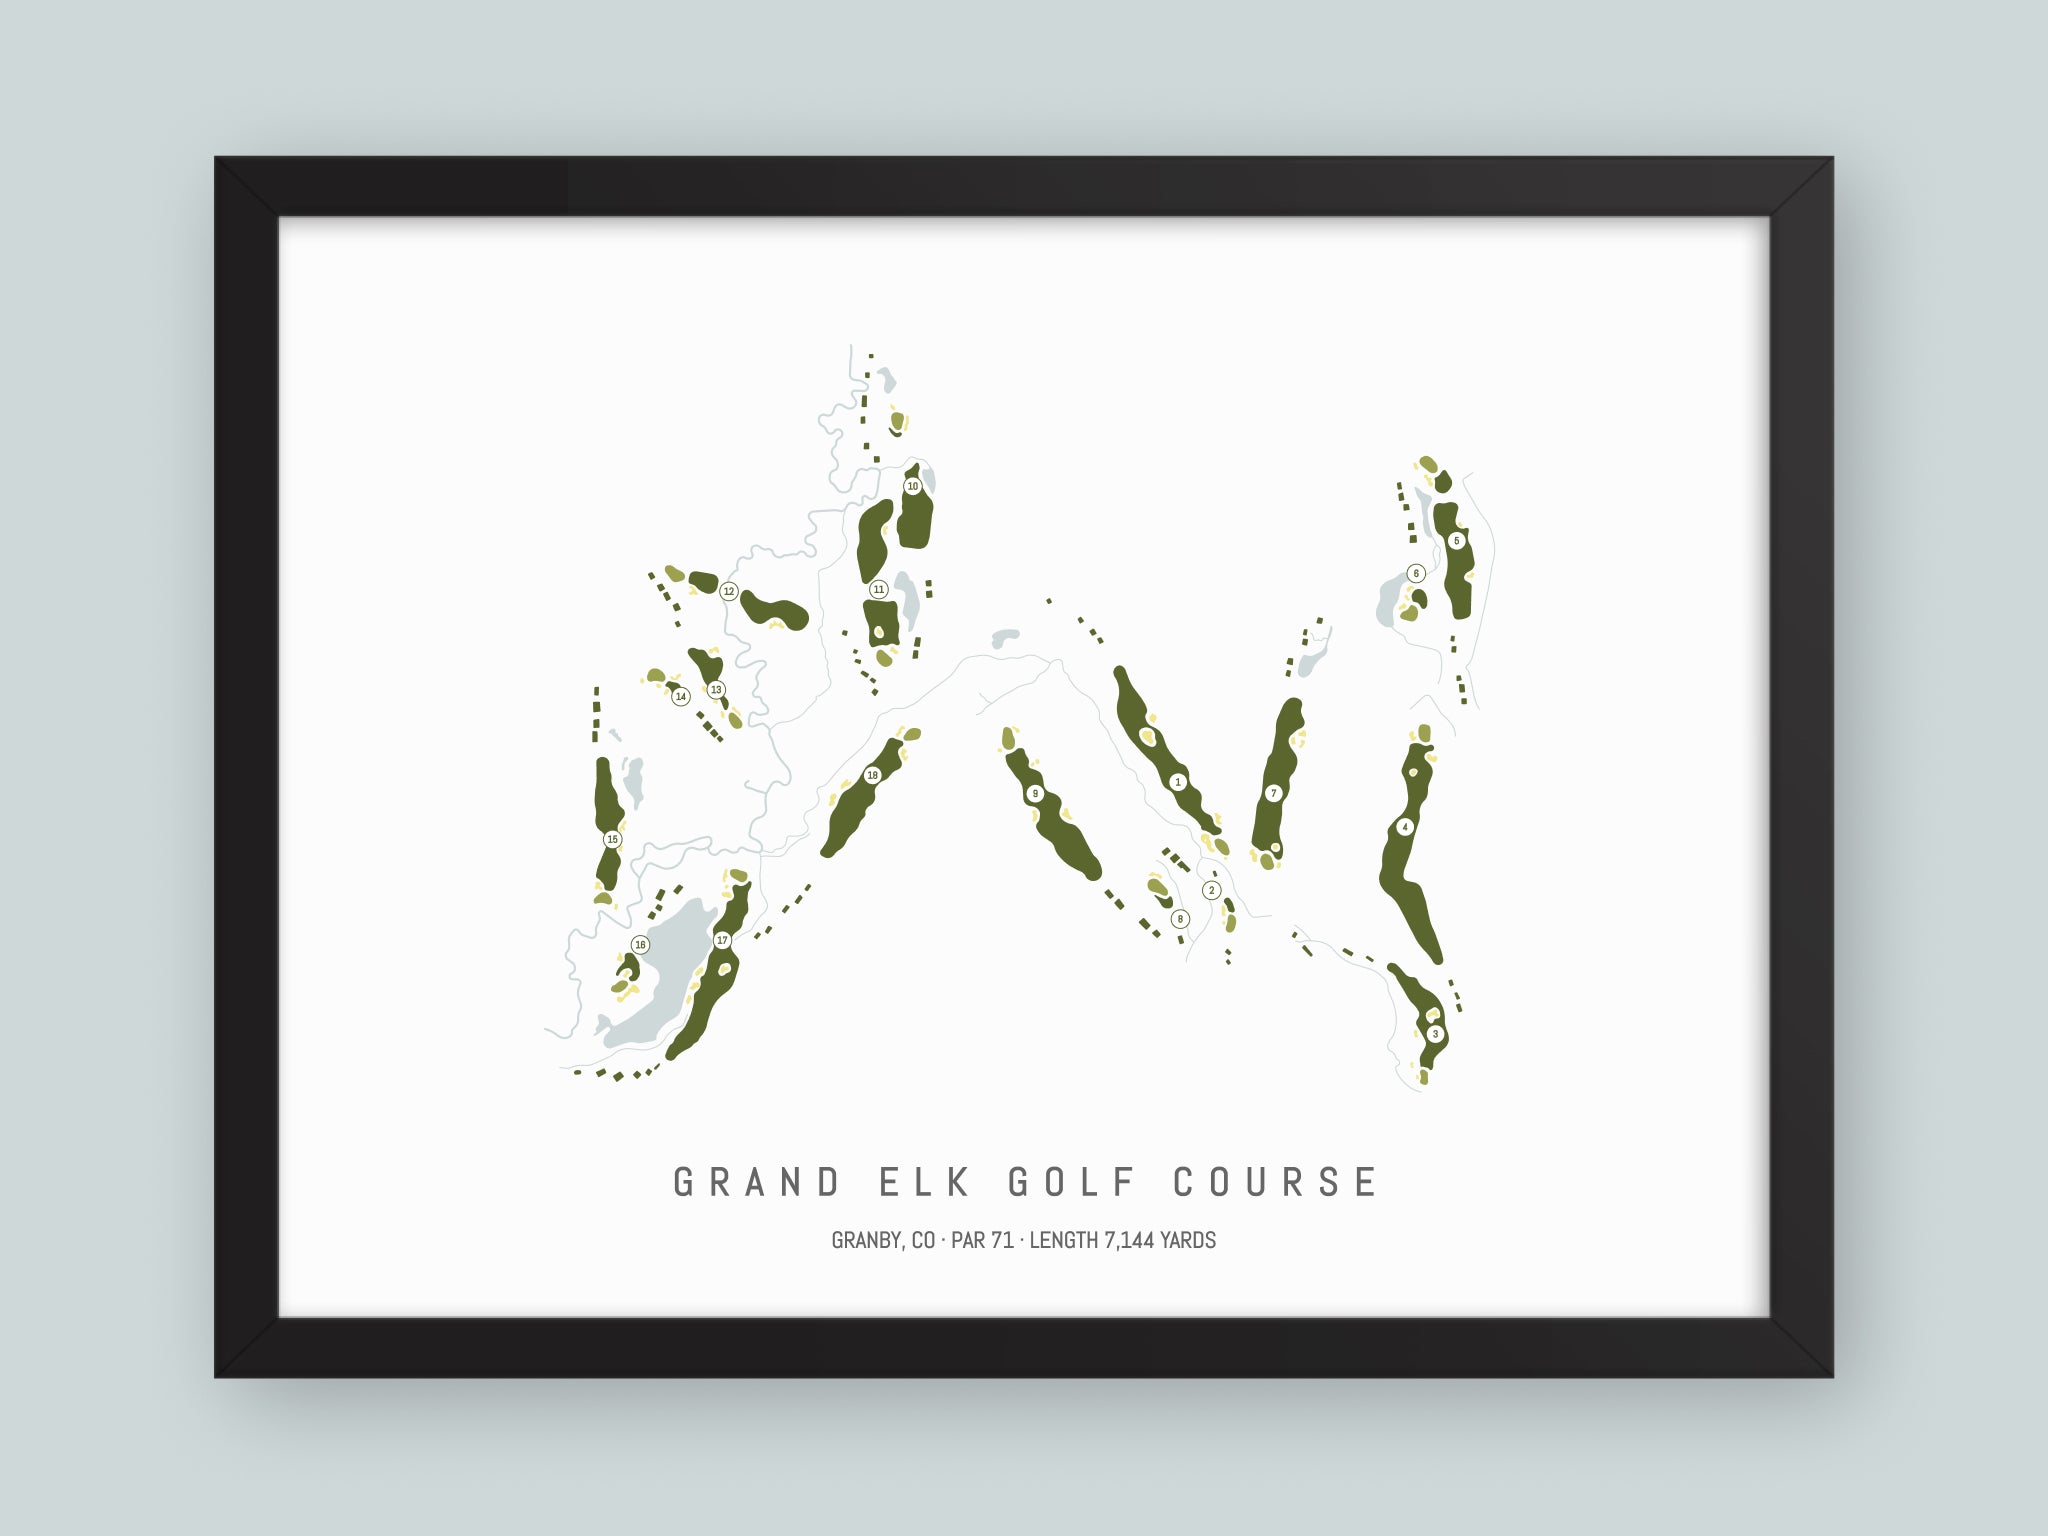 Grand-Elk-Golf-Course-CO--Black-Frame-24x18-With-Hole-Numbers